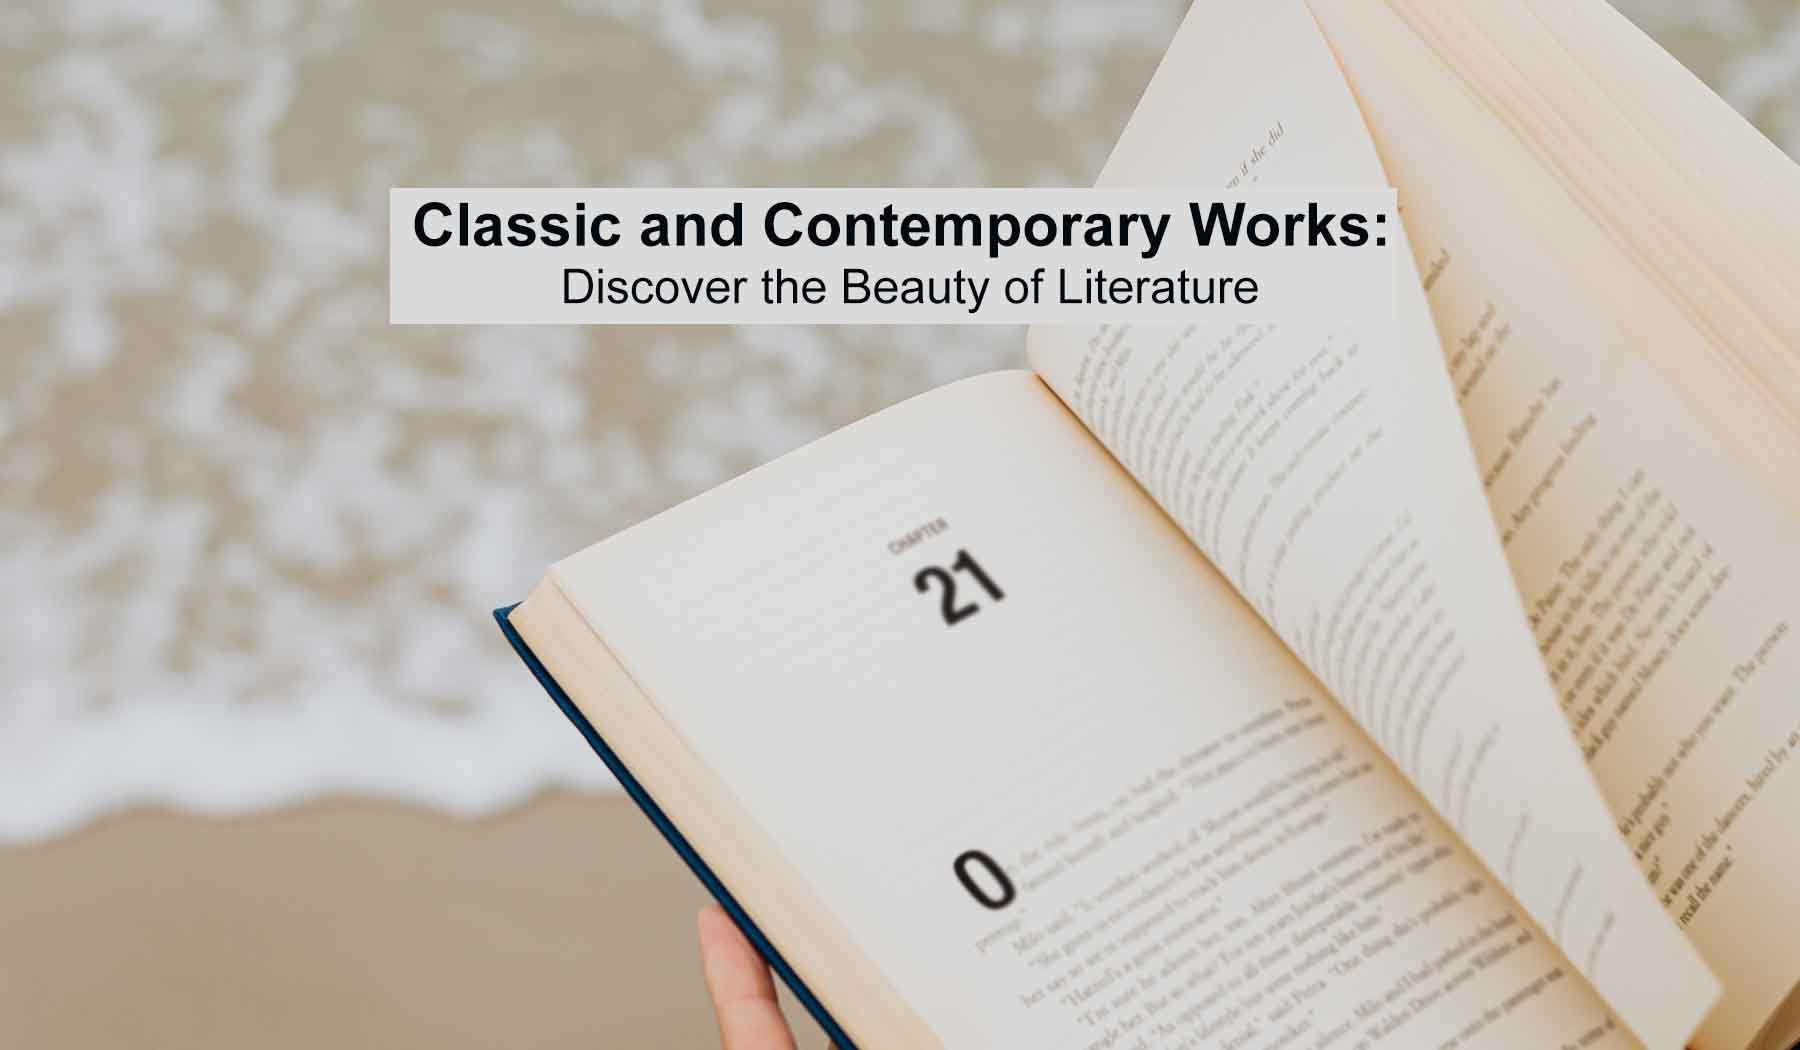 Discover the Beauty of Literature